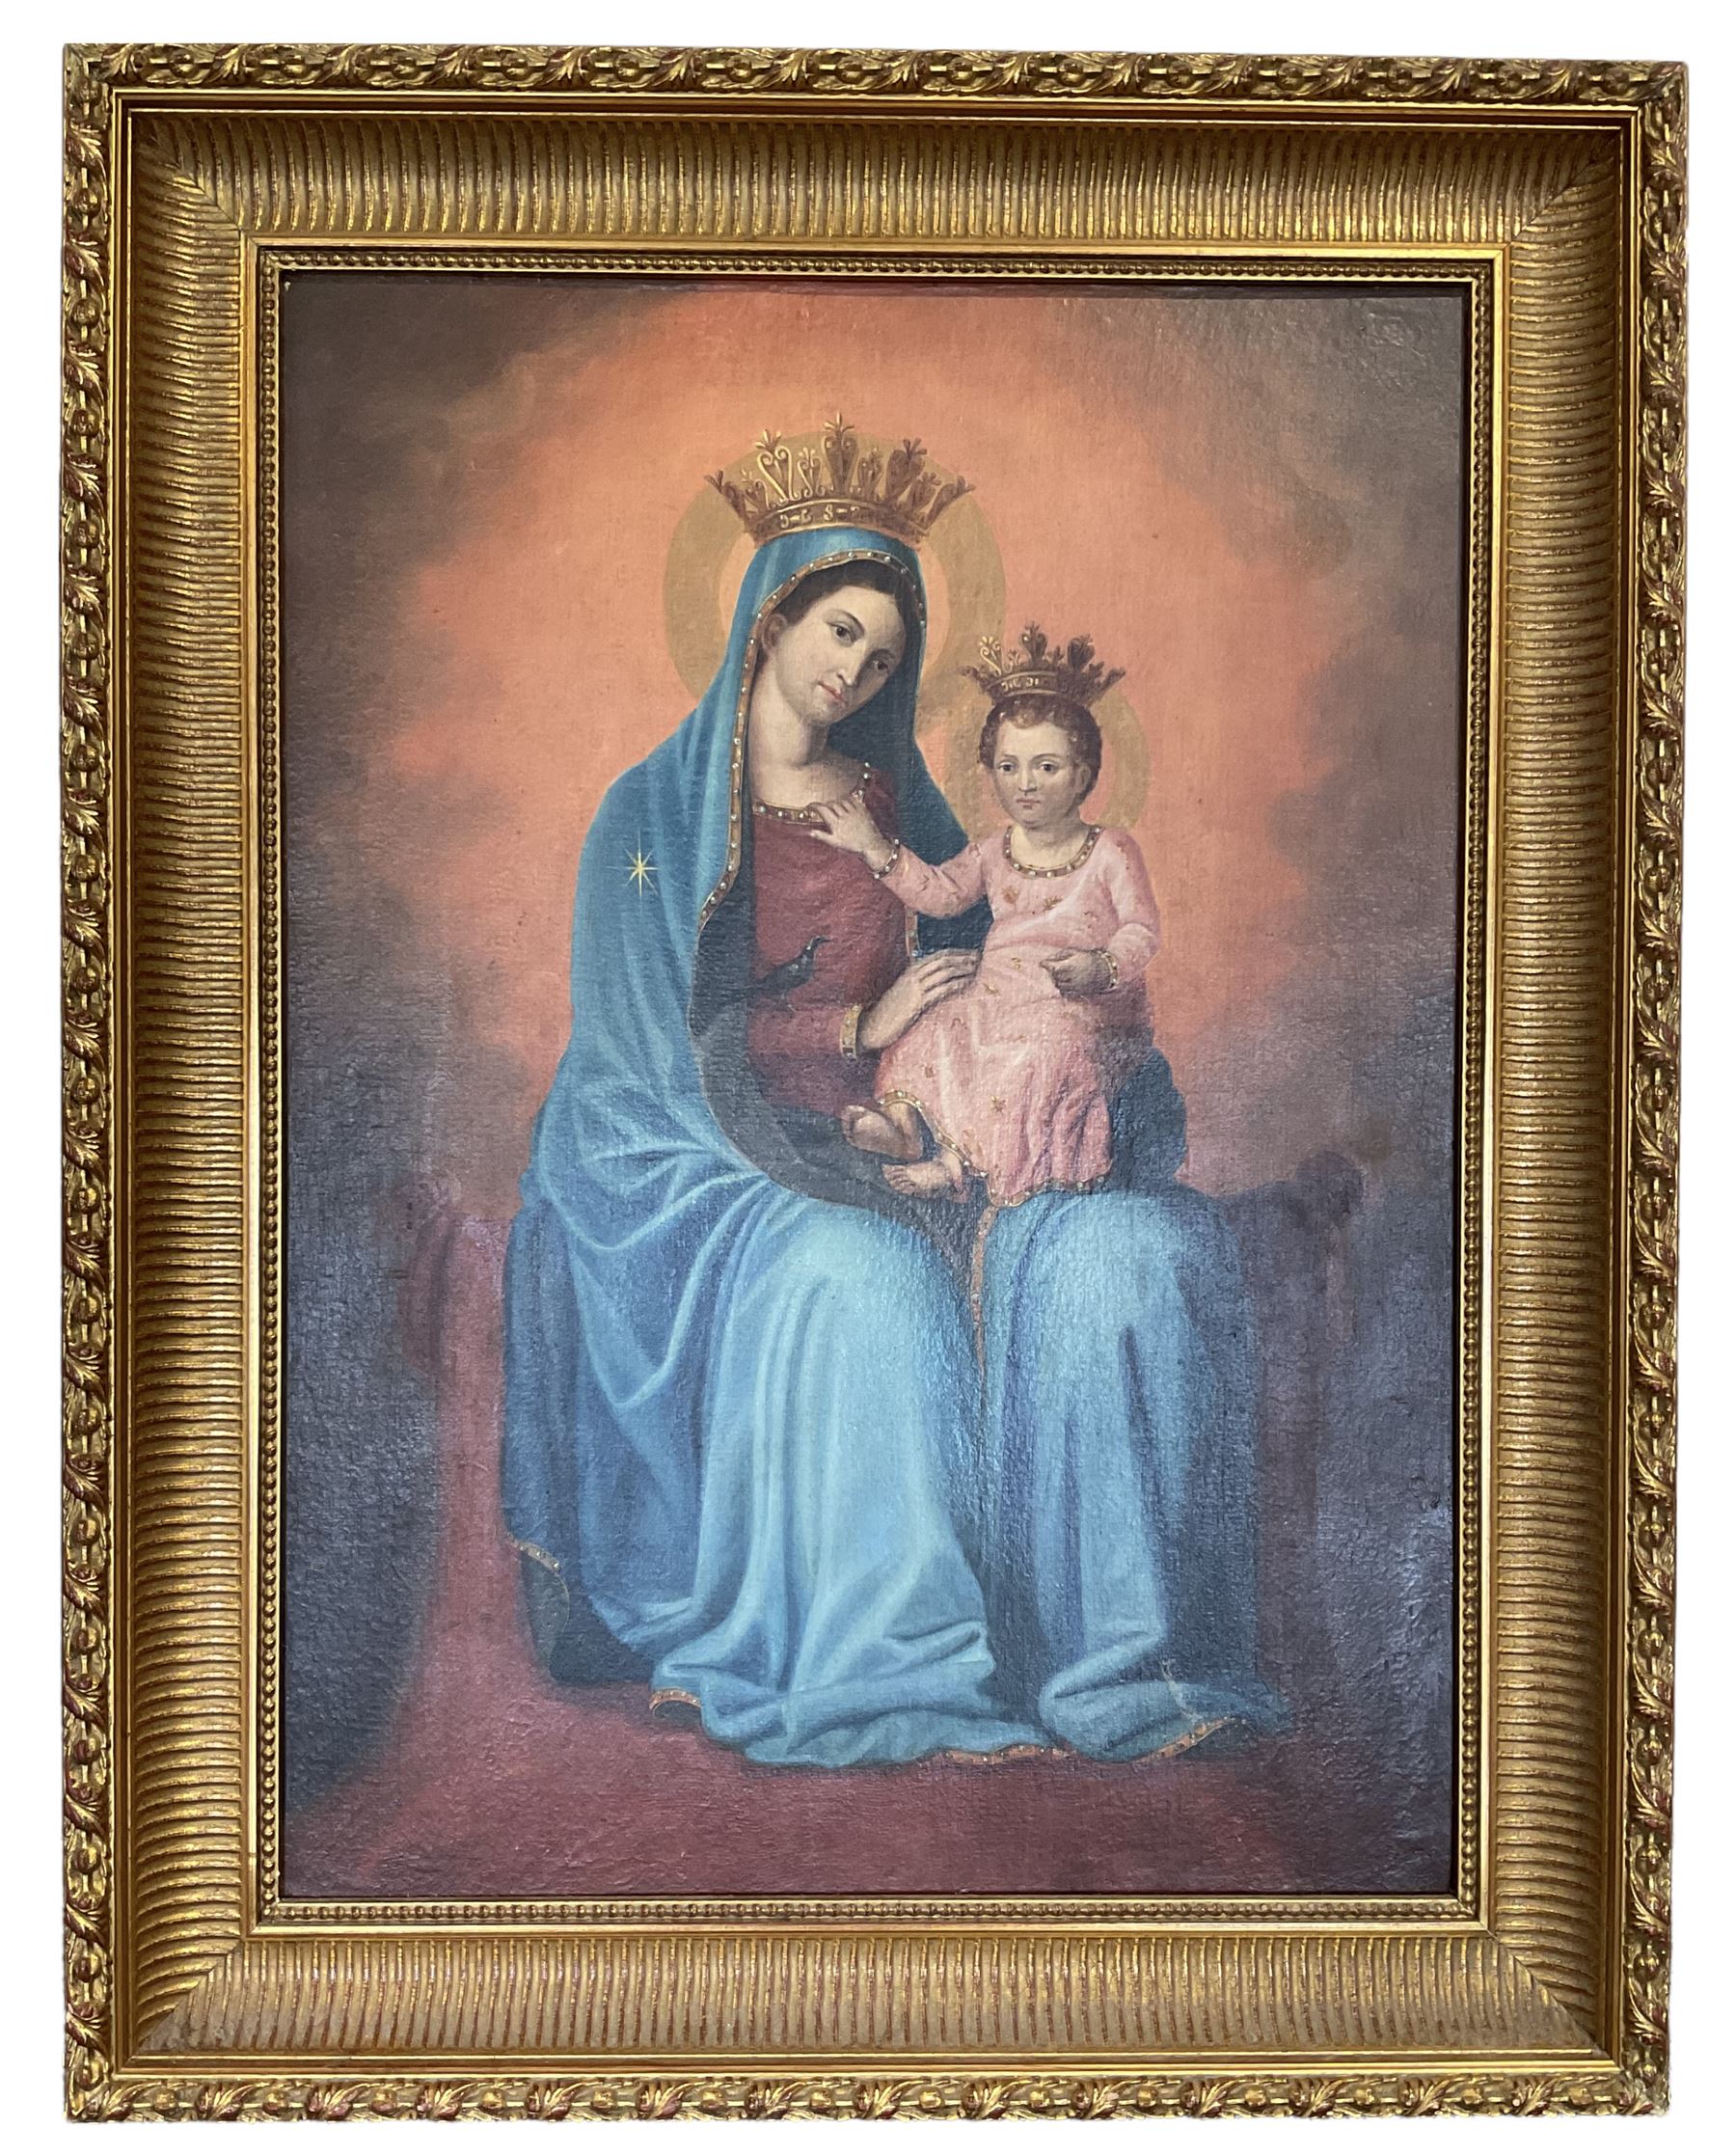 Continental School (18th/19th century): Our Lady of Graces - Madonna and Child - Image 2 of 2